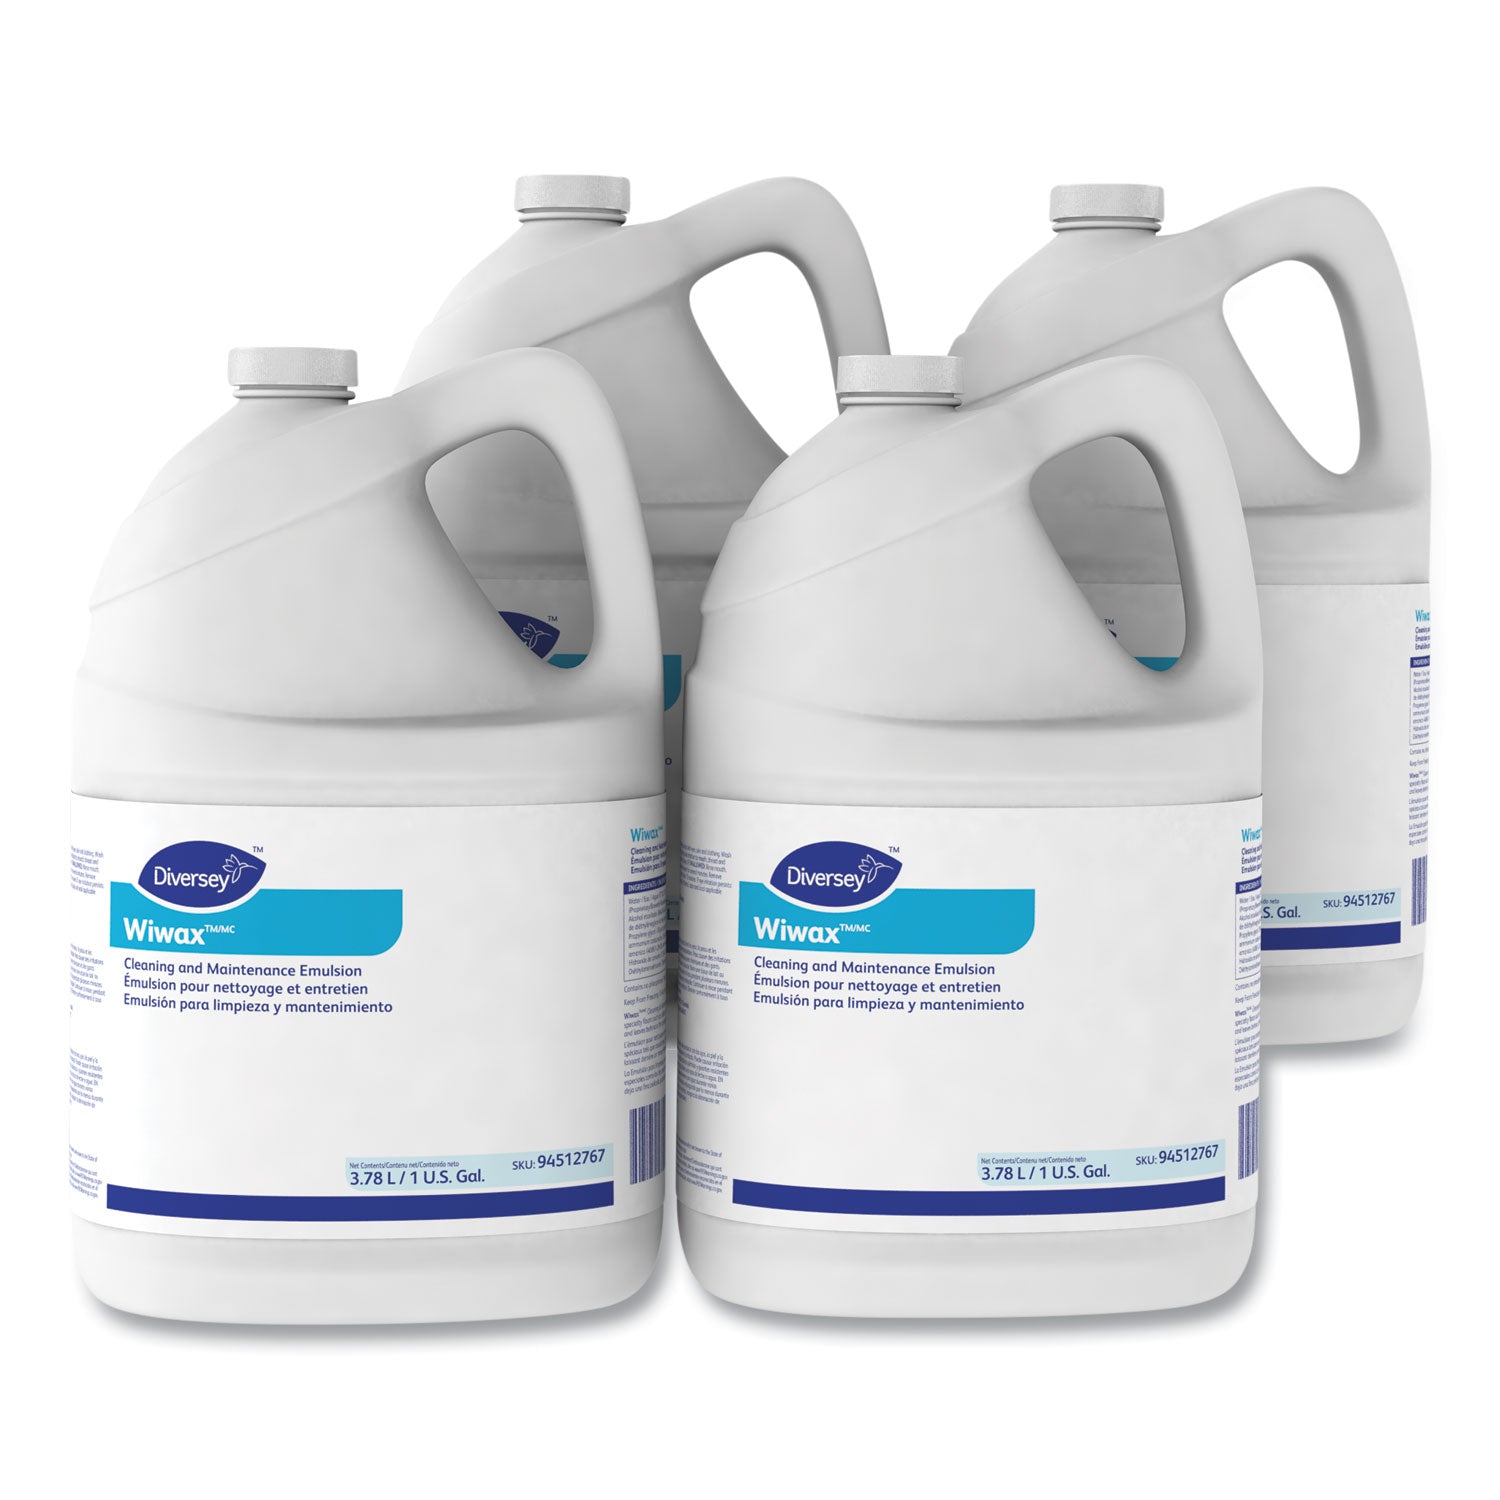 wiwax-cleaning-and-maintenance-solution-liquid-1-gal-bottle-4-carton_dvo94512767 - 1